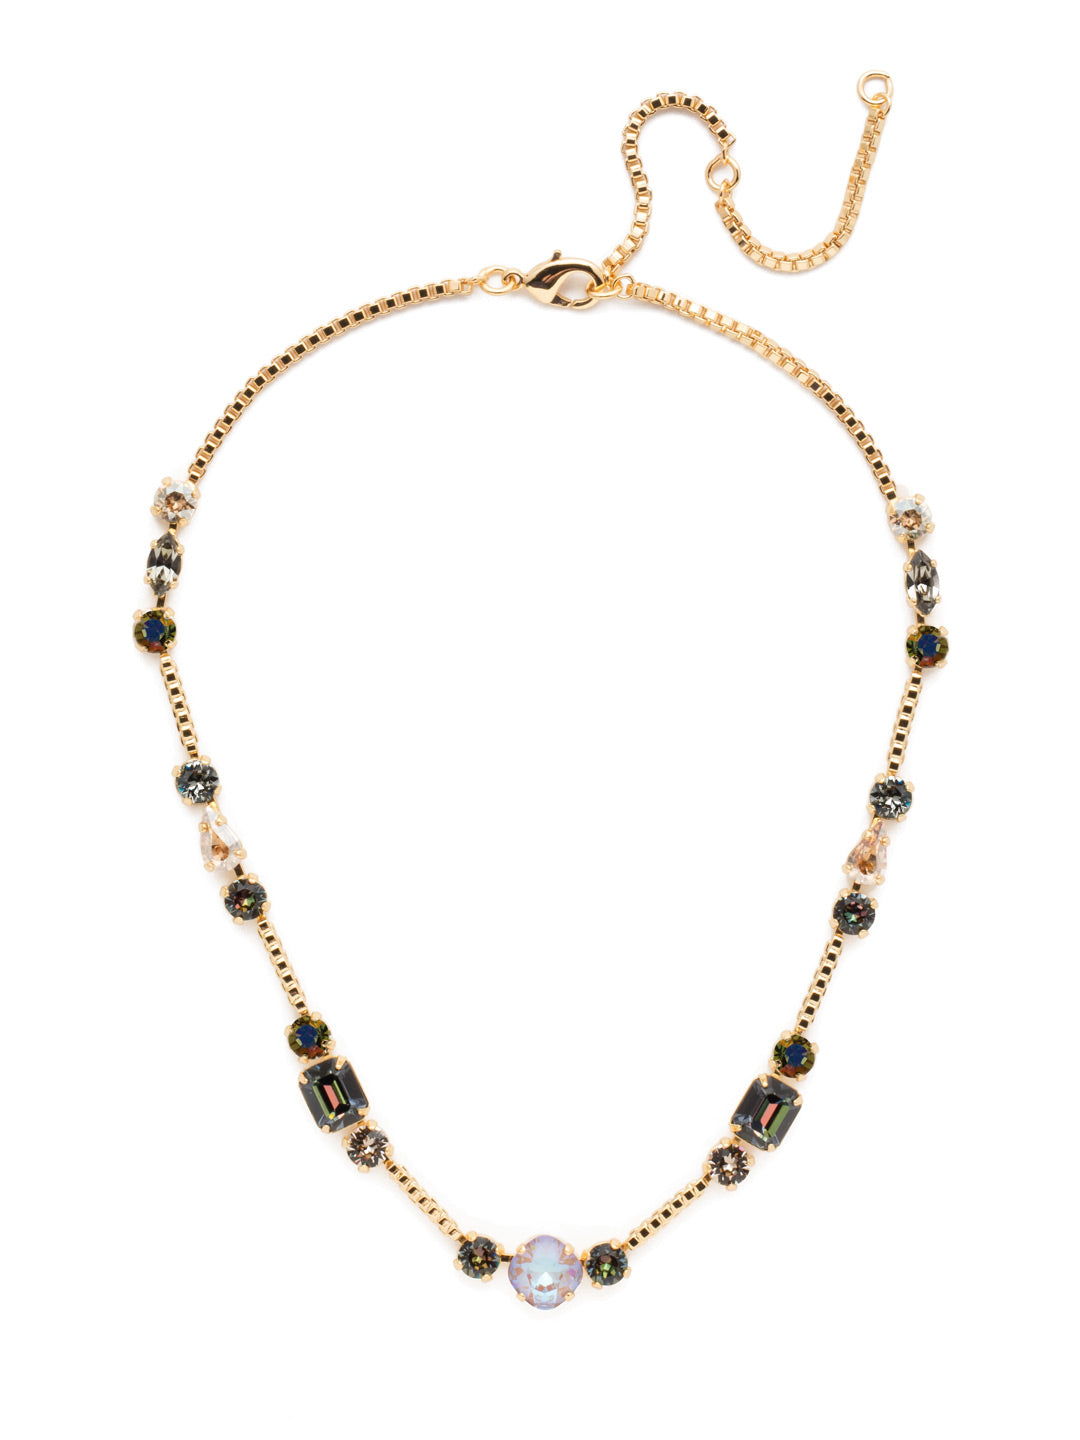 Poppy Tennis Necklace - NEN18BGCSM - <p>The Poppy Tennis Necklace is anything but ordinary. Wear it all when you combine classic, baguette and navette sparklers. It's structured and sophisticated. From Sorrelli's Cashmere collection in our Bright Gold-tone finish.</p>